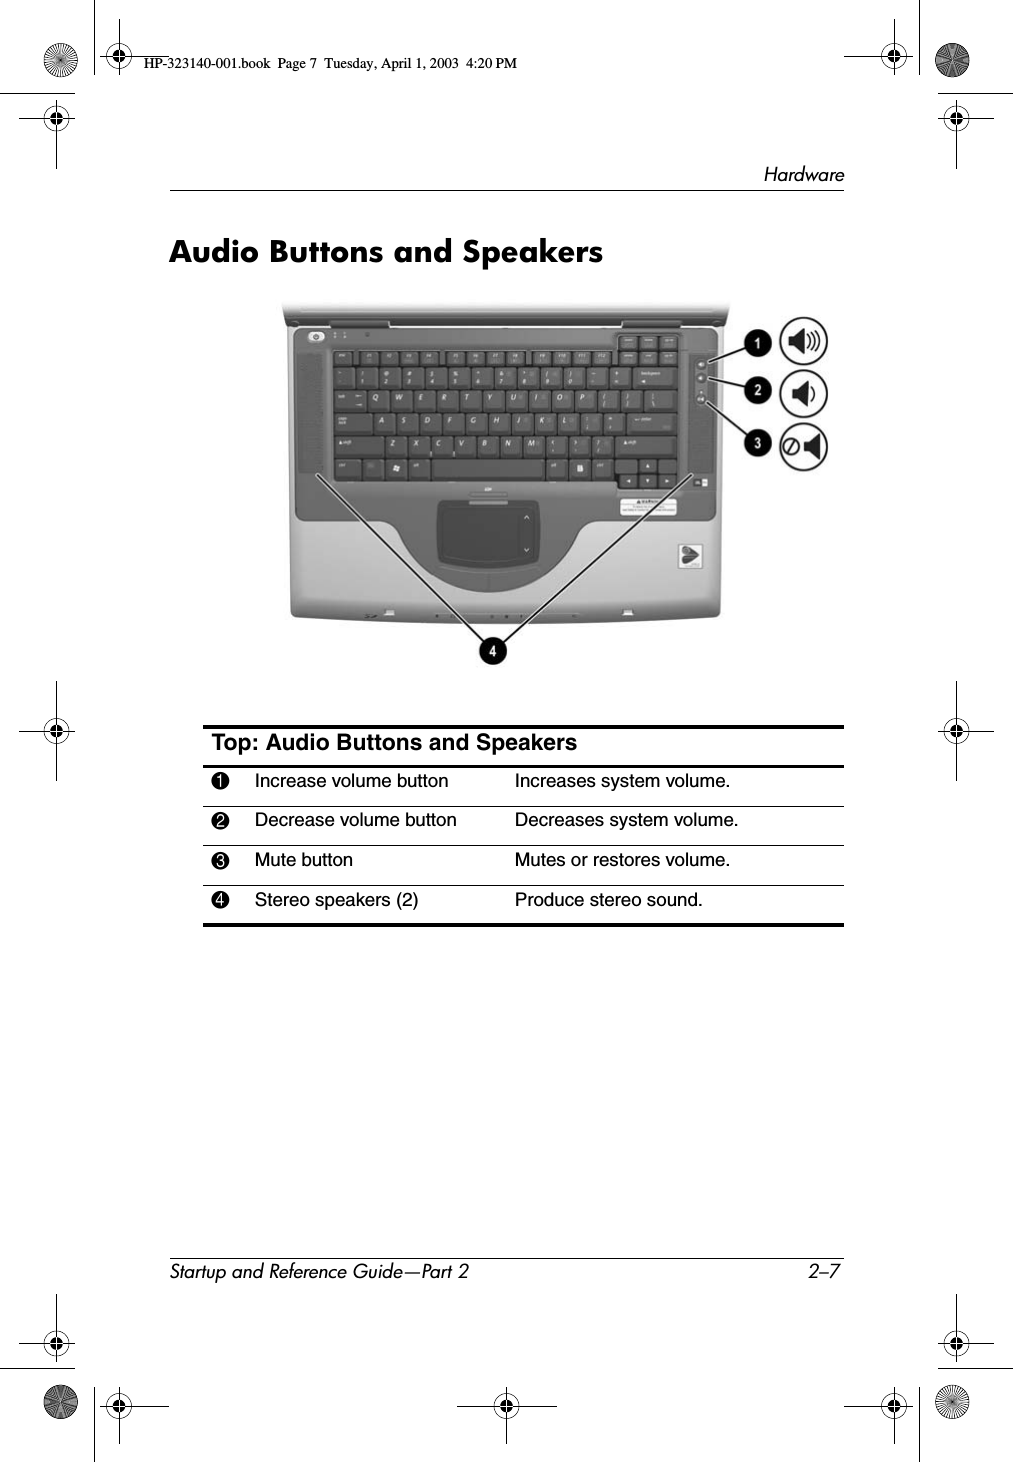 HardwareStartup and Reference Guide—Part 2 2–7Audio Buttons and SpeakersTop: Audio Buttons and Speakers1Increase volume button Increases system volume.2Decrease volume button Decreases system volume.3Mute button Mutes or restores volume.4Stereo speakers (2) Produce stereo sound.HP-323140-001.book  Page 7  Tuesday, April 1, 2003  4:20 PM